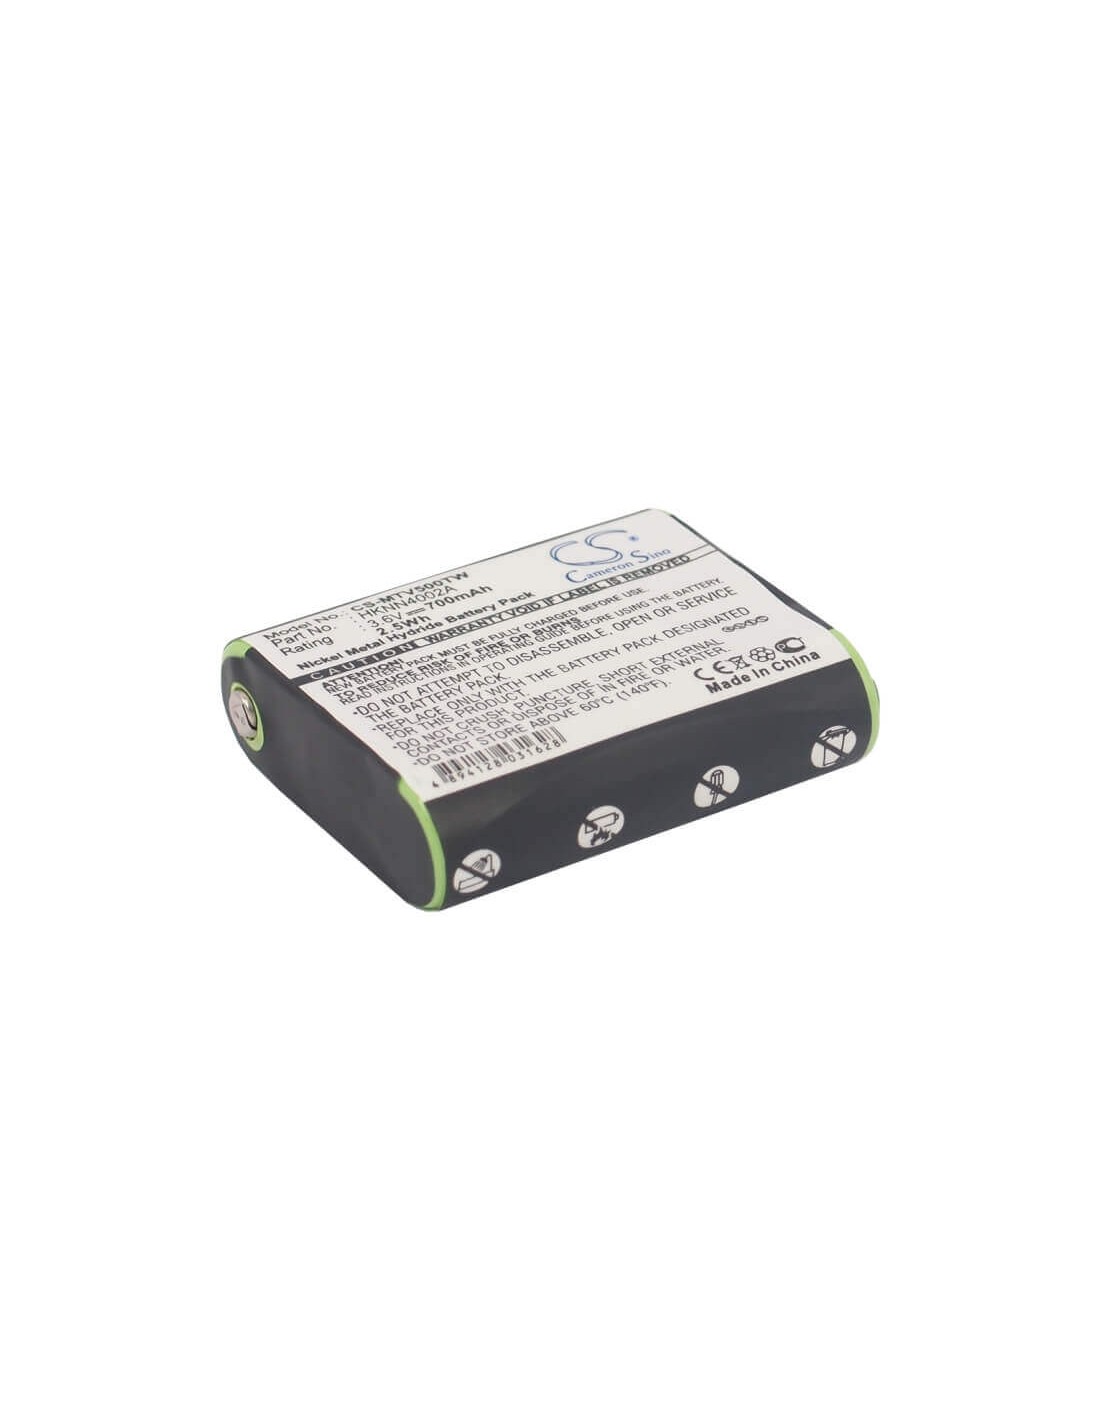 Battery for Motorola Talkabout T4800, Talkabout T4900, Talkabout T5000 3.6V, 700mAh - 2.52Wh